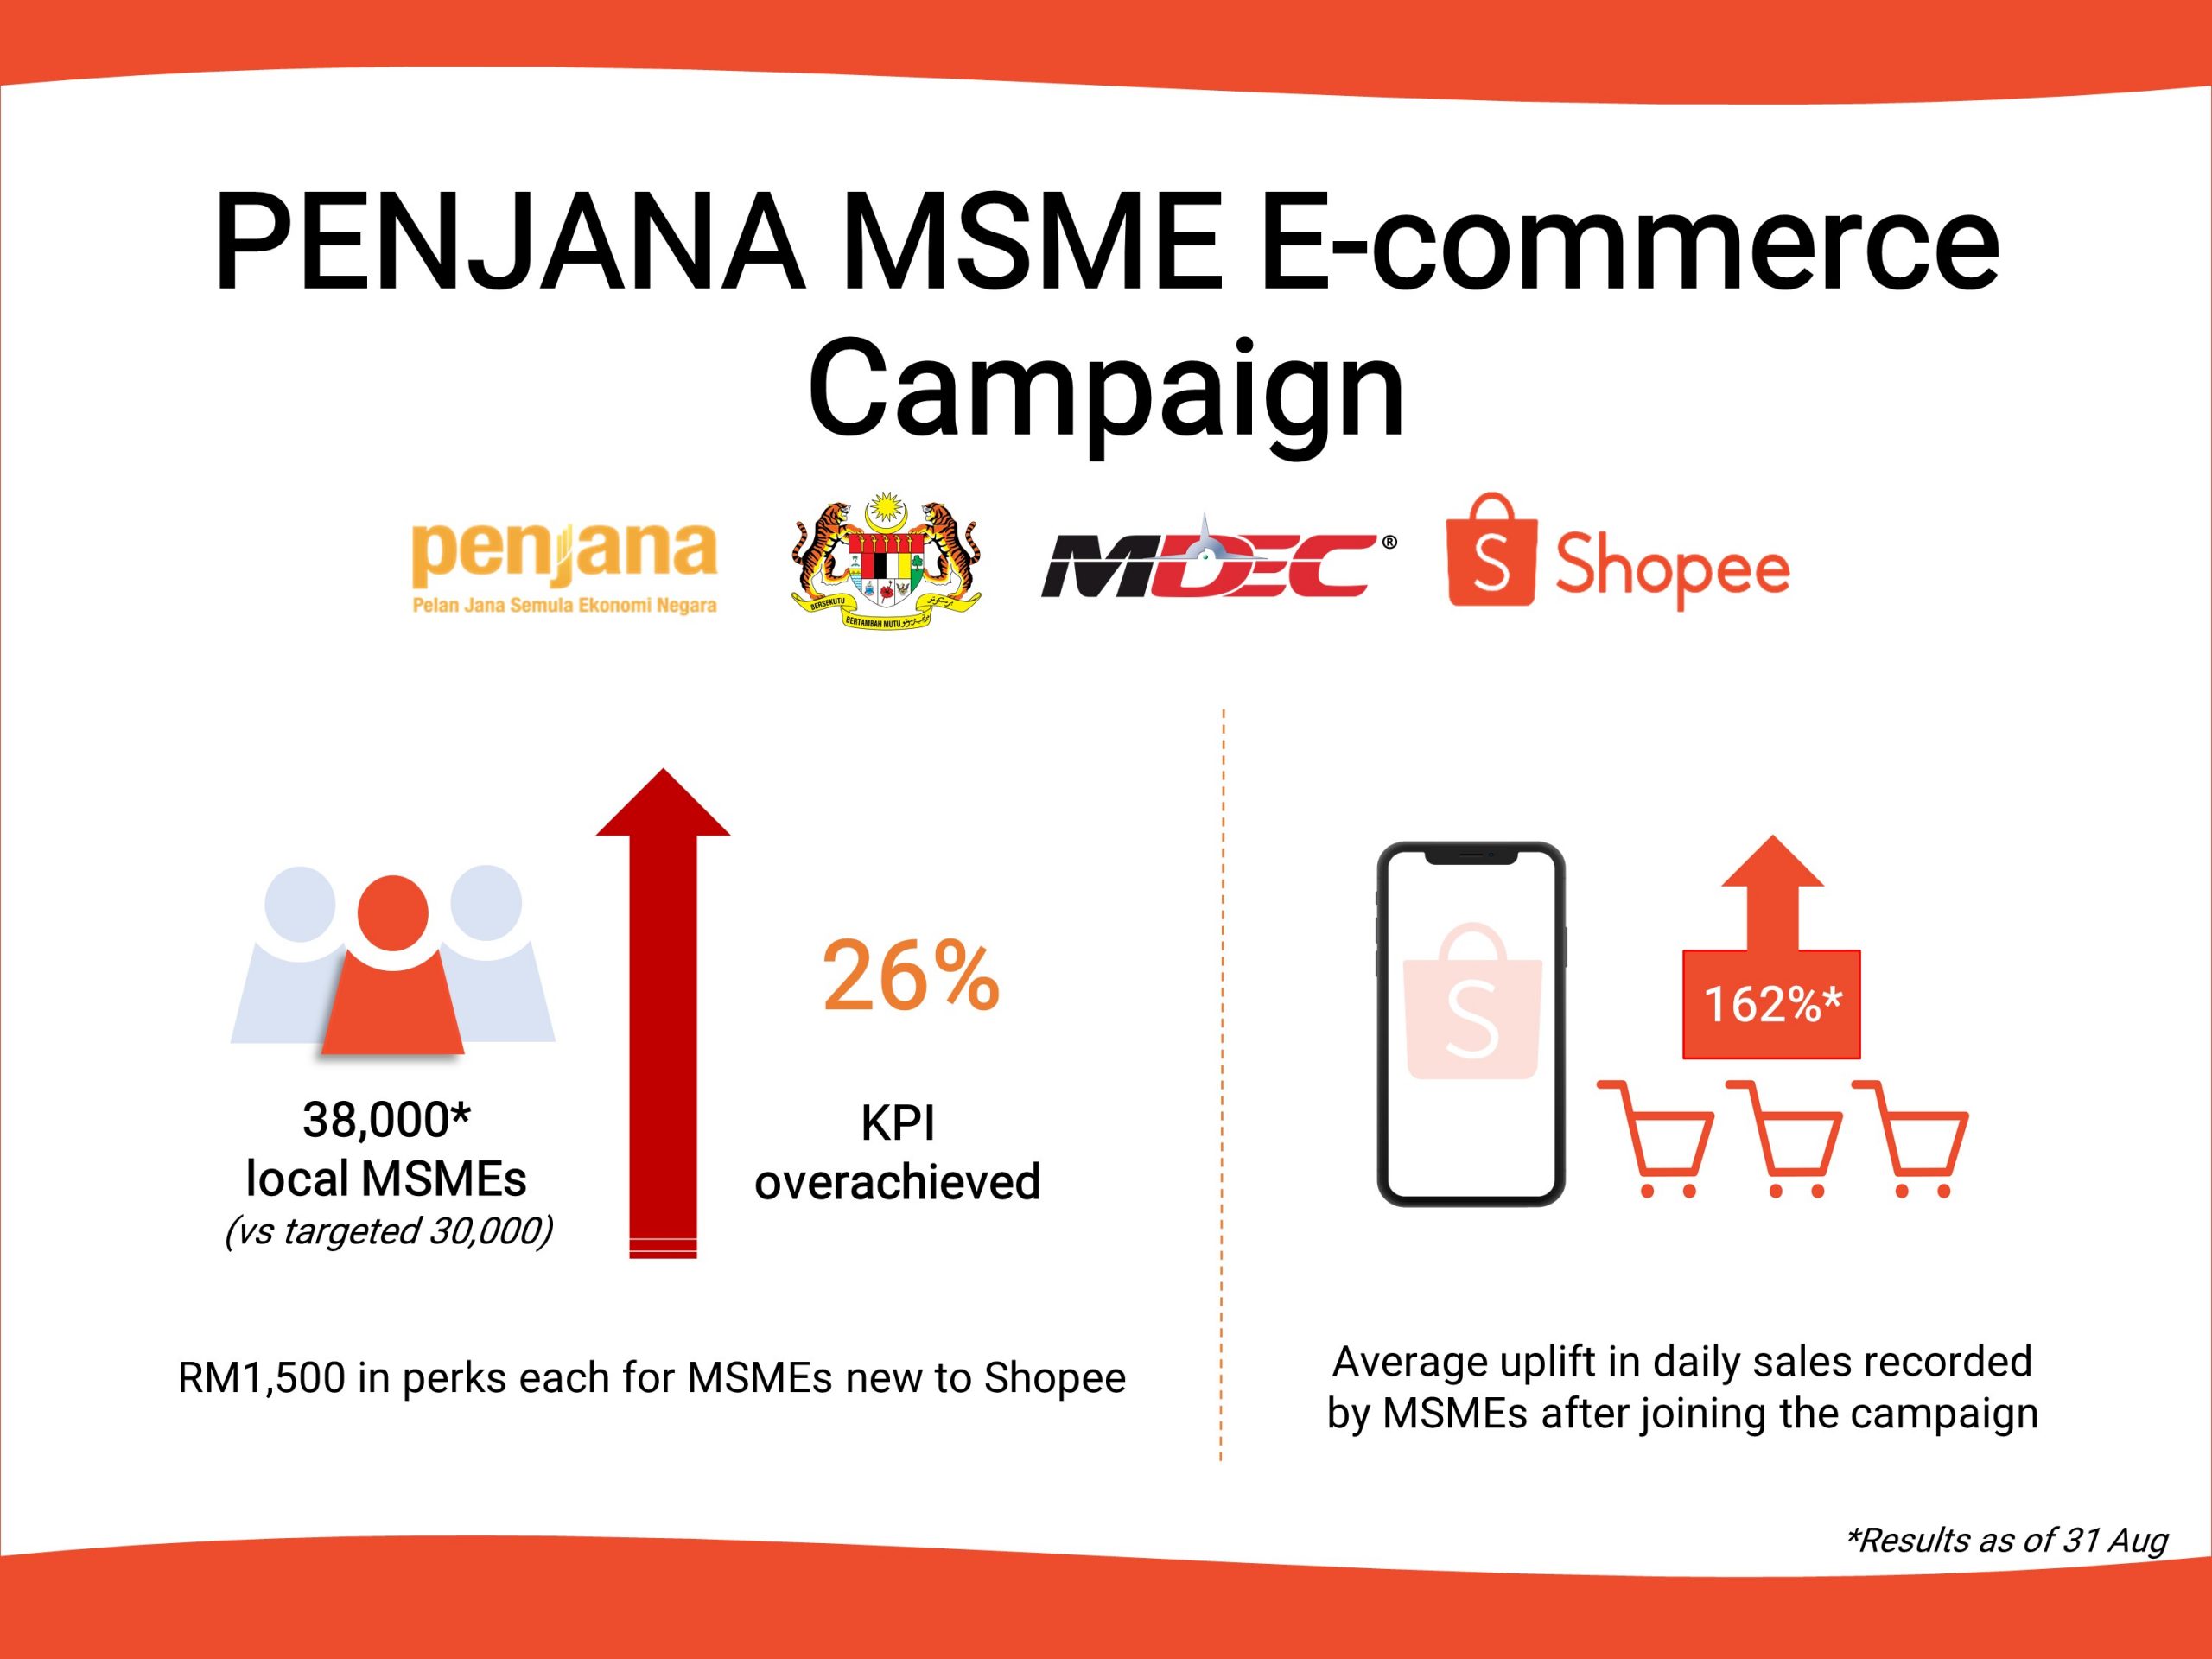 PENJANA MSME E commerce Campaign Infographic scaled